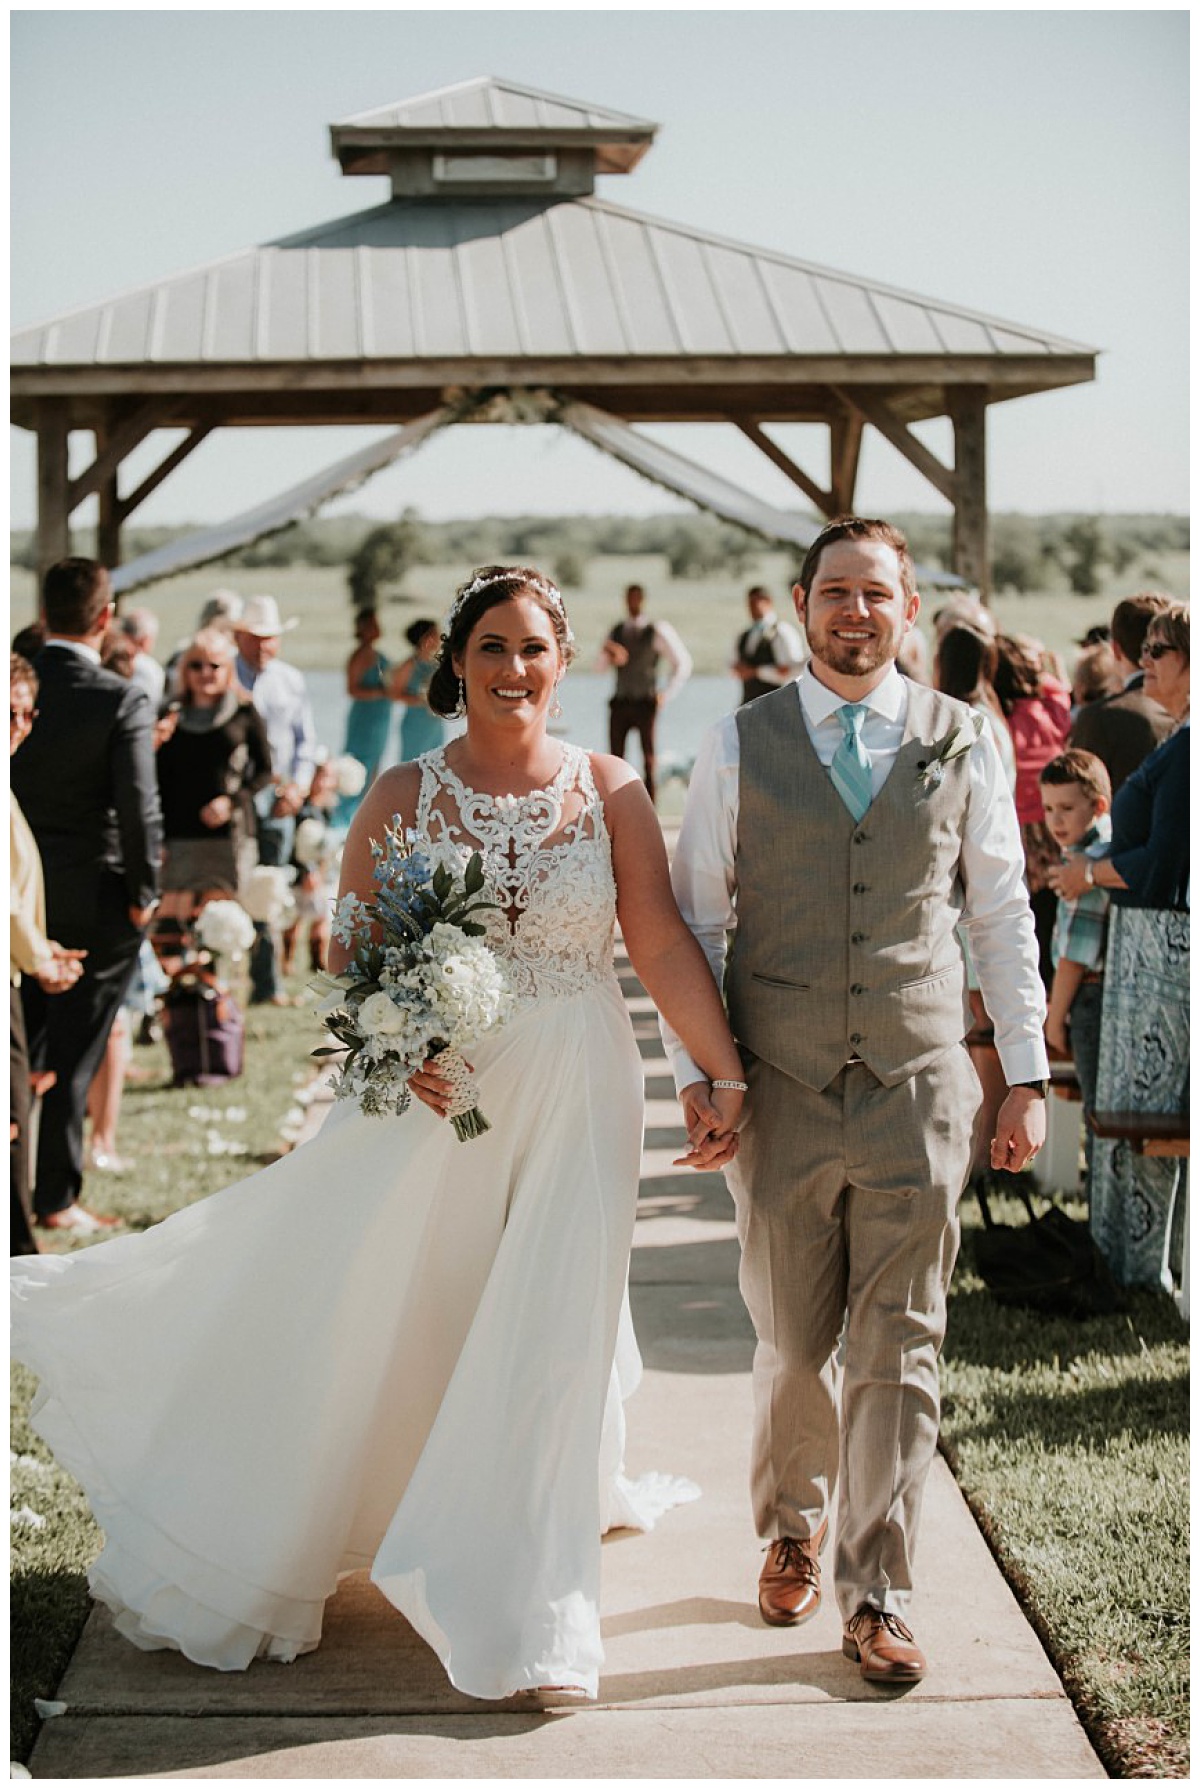 Just married at Emery's Buffalo Creek | Houston's only Wedding Winery wedding venue 